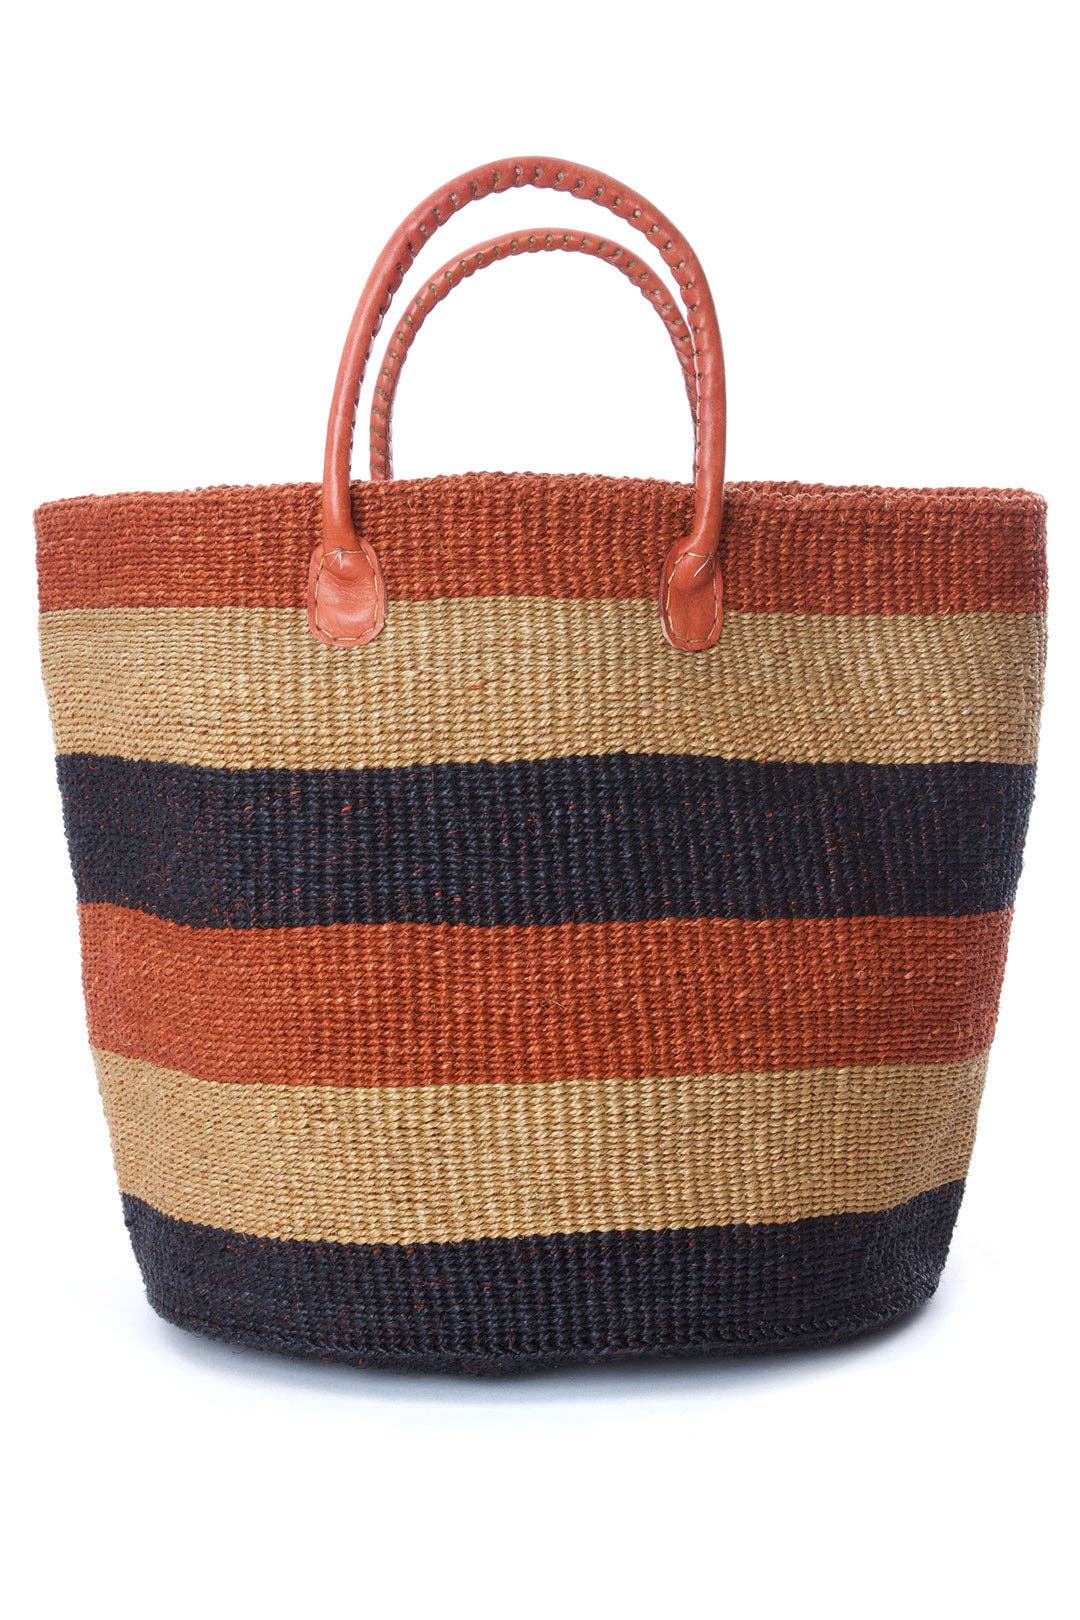 Ochre, Sand & Onyx Strata Tote with Leather Handles Bags Swahili | AFRICAN MODERN   